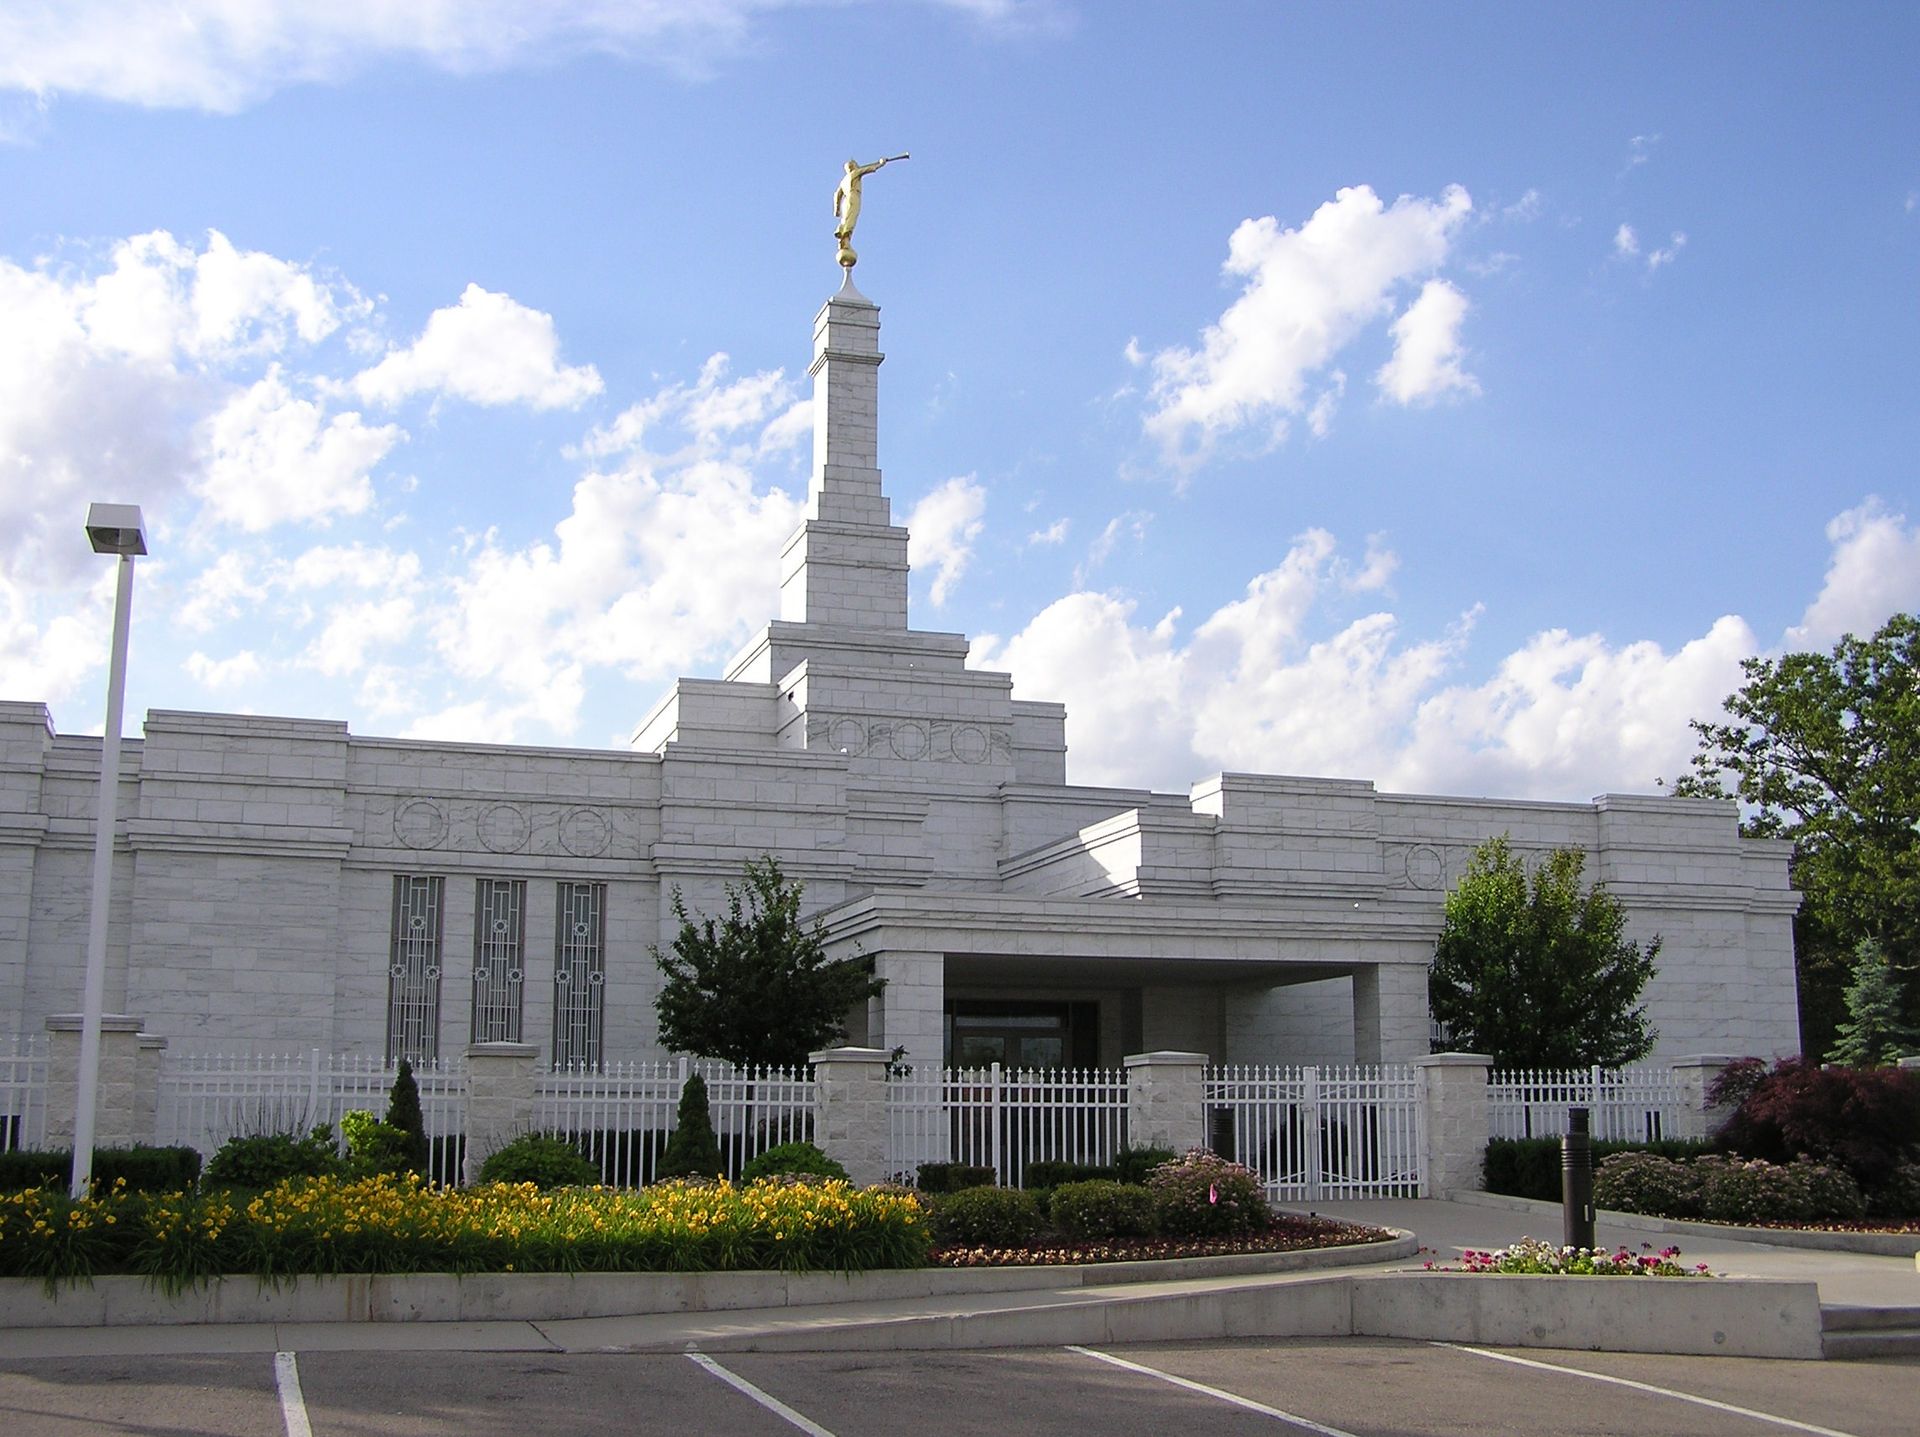 An exterior view of the Detroit Michigan Temple.